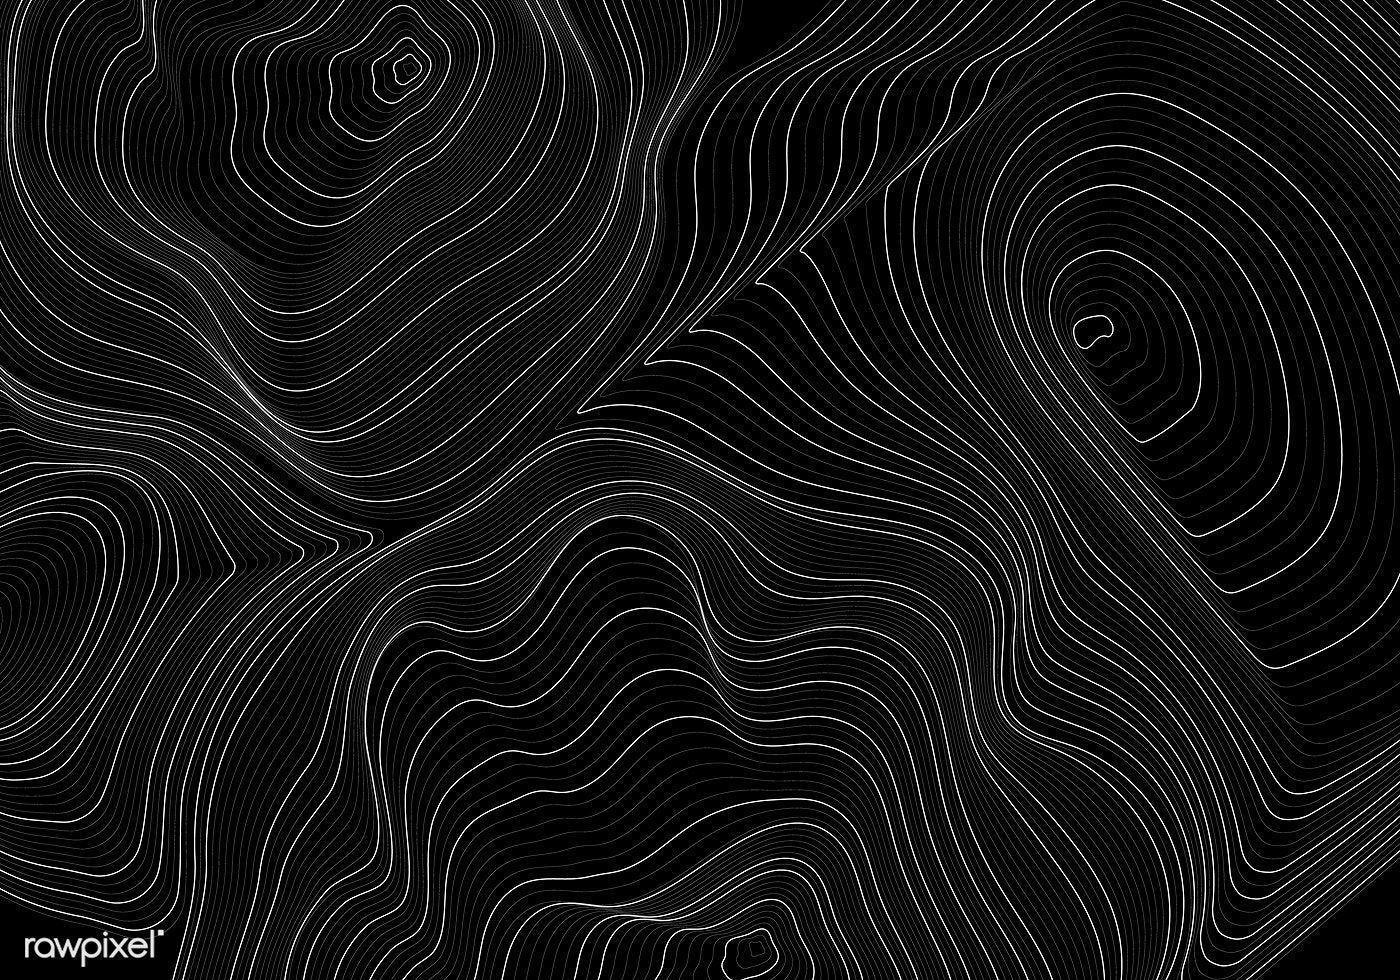 Download premium vector of Black and white abstract map contour lines. Contour line, Black and white abstract, Stock image free